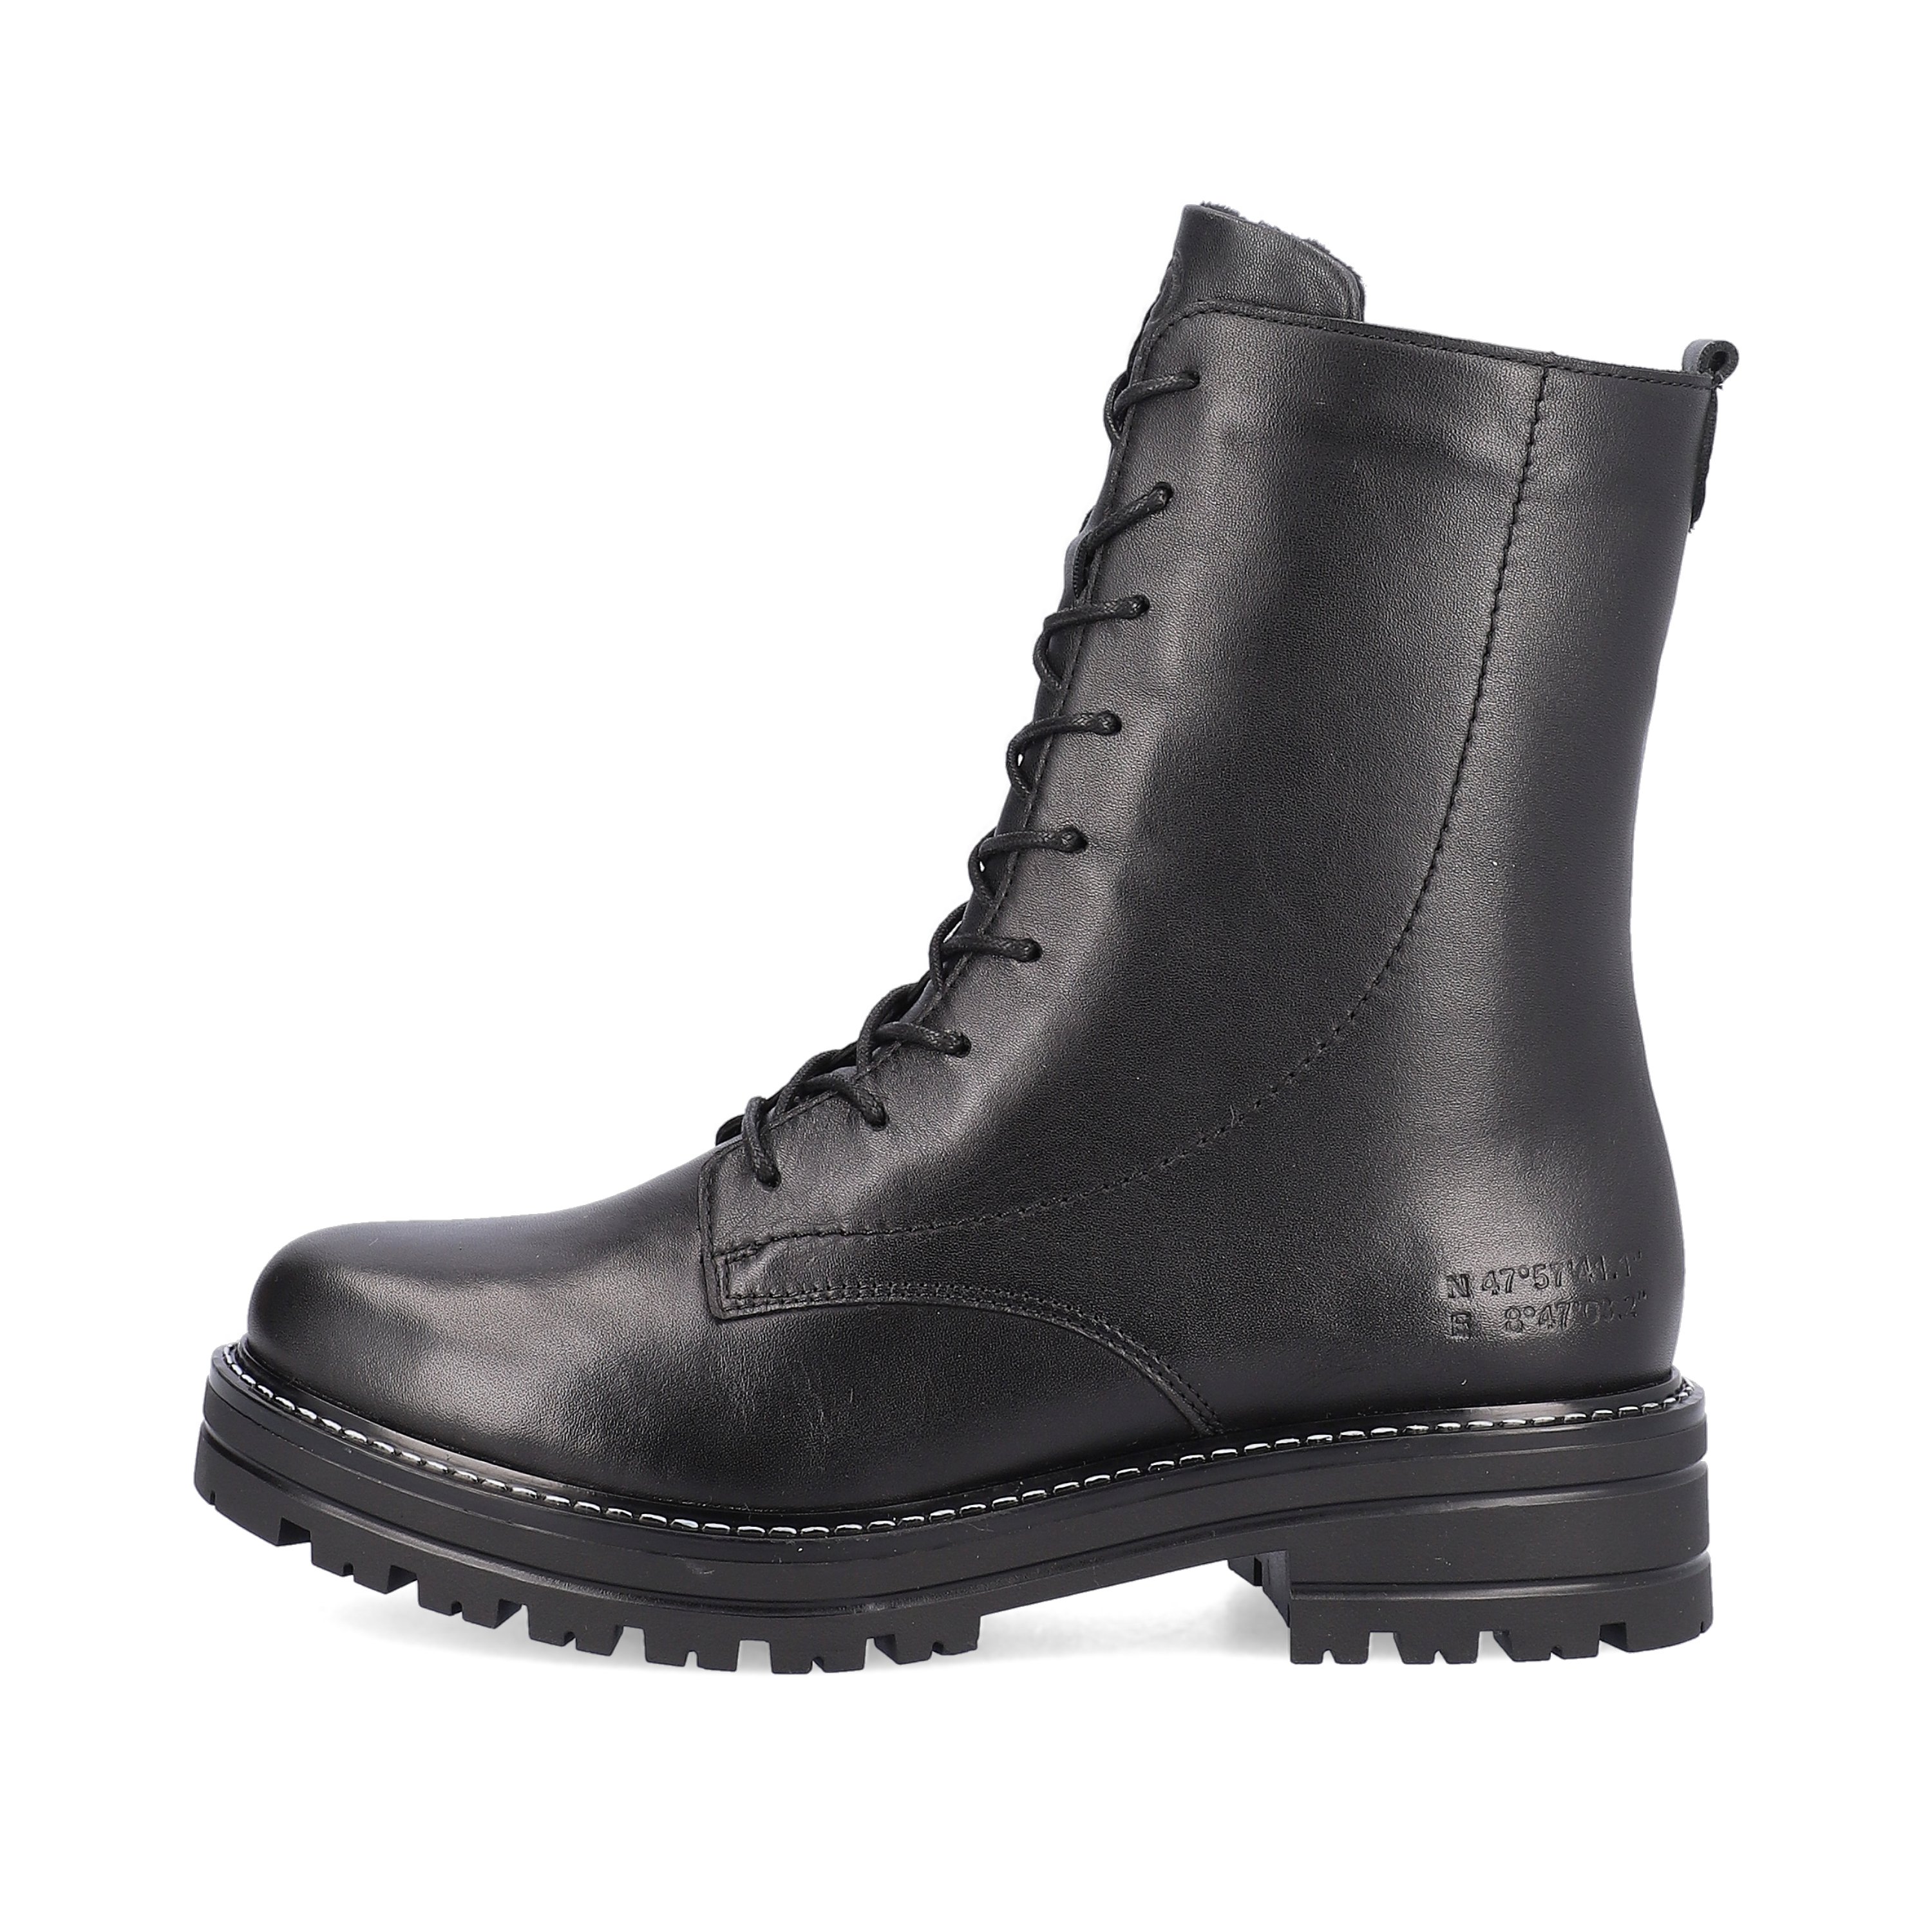 Jet black remonte women´s biker boots D2278-01 with cushioning profile sole. The outside of the shoe